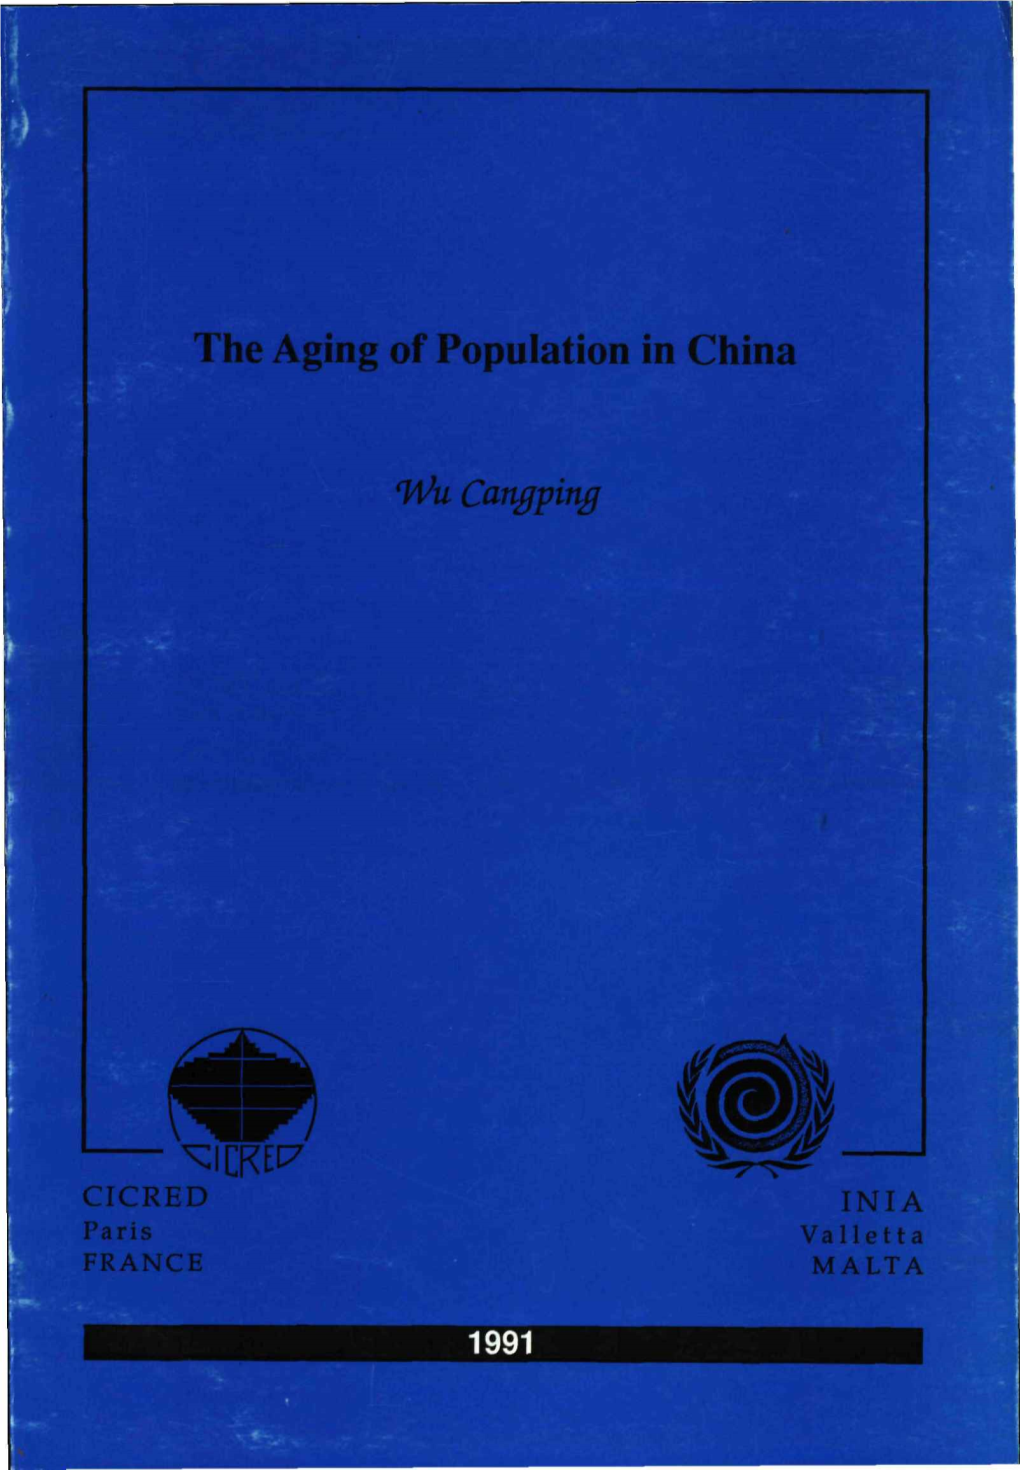 The Aging of Population in China